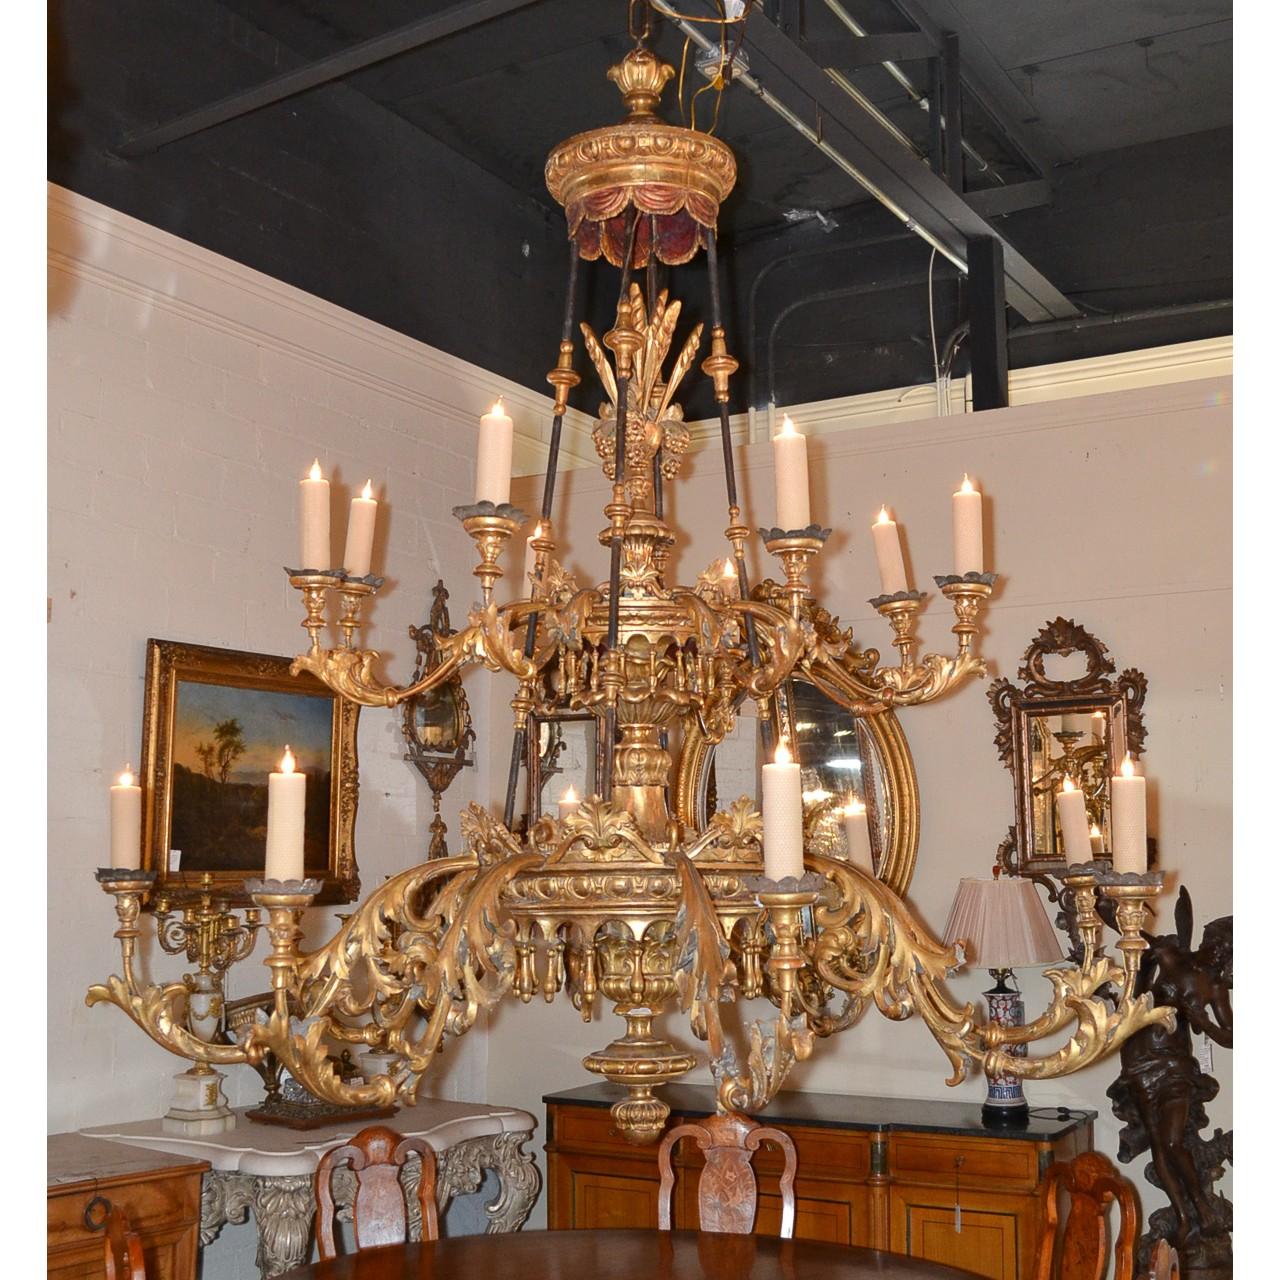 Extraordinary and large 19th century French hand-carved giltwood chandelier with a curtained crown atop carved wheat sheaves and grape clusters. The stem with superbly detailed acanthus leaf carvings displayed in scrolling fashion and accented with